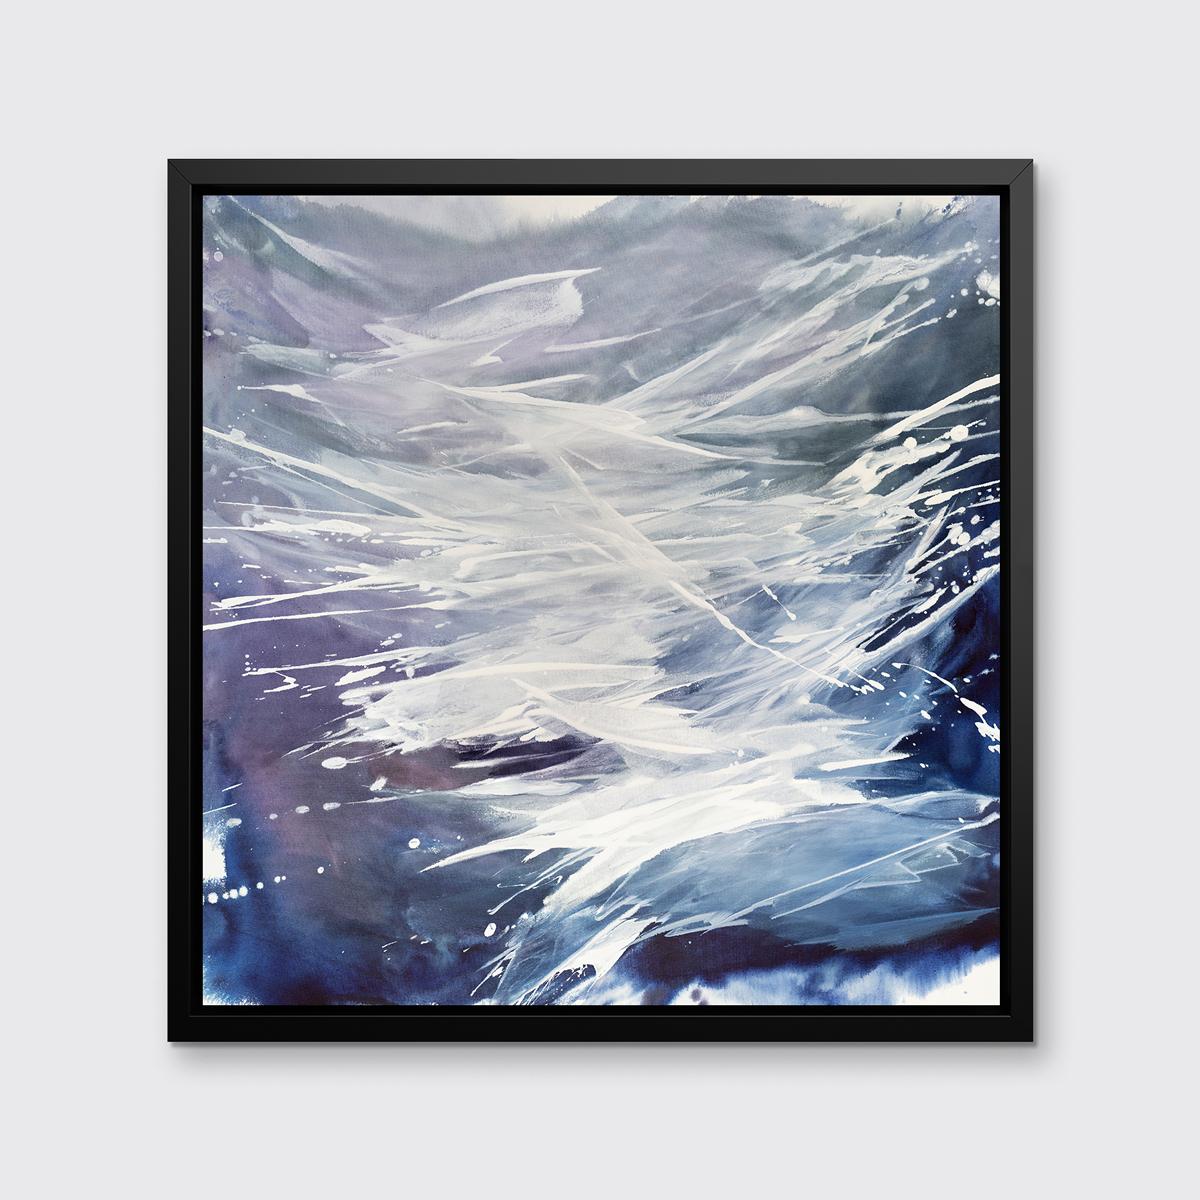 This contemporary abstract limited edition print by Teodora Guererra features a cool palette, with layers of washes of blue, grey, violet and and white applied in sweeping gestures across the piece.

This Limited Edition giclee print by Teodora